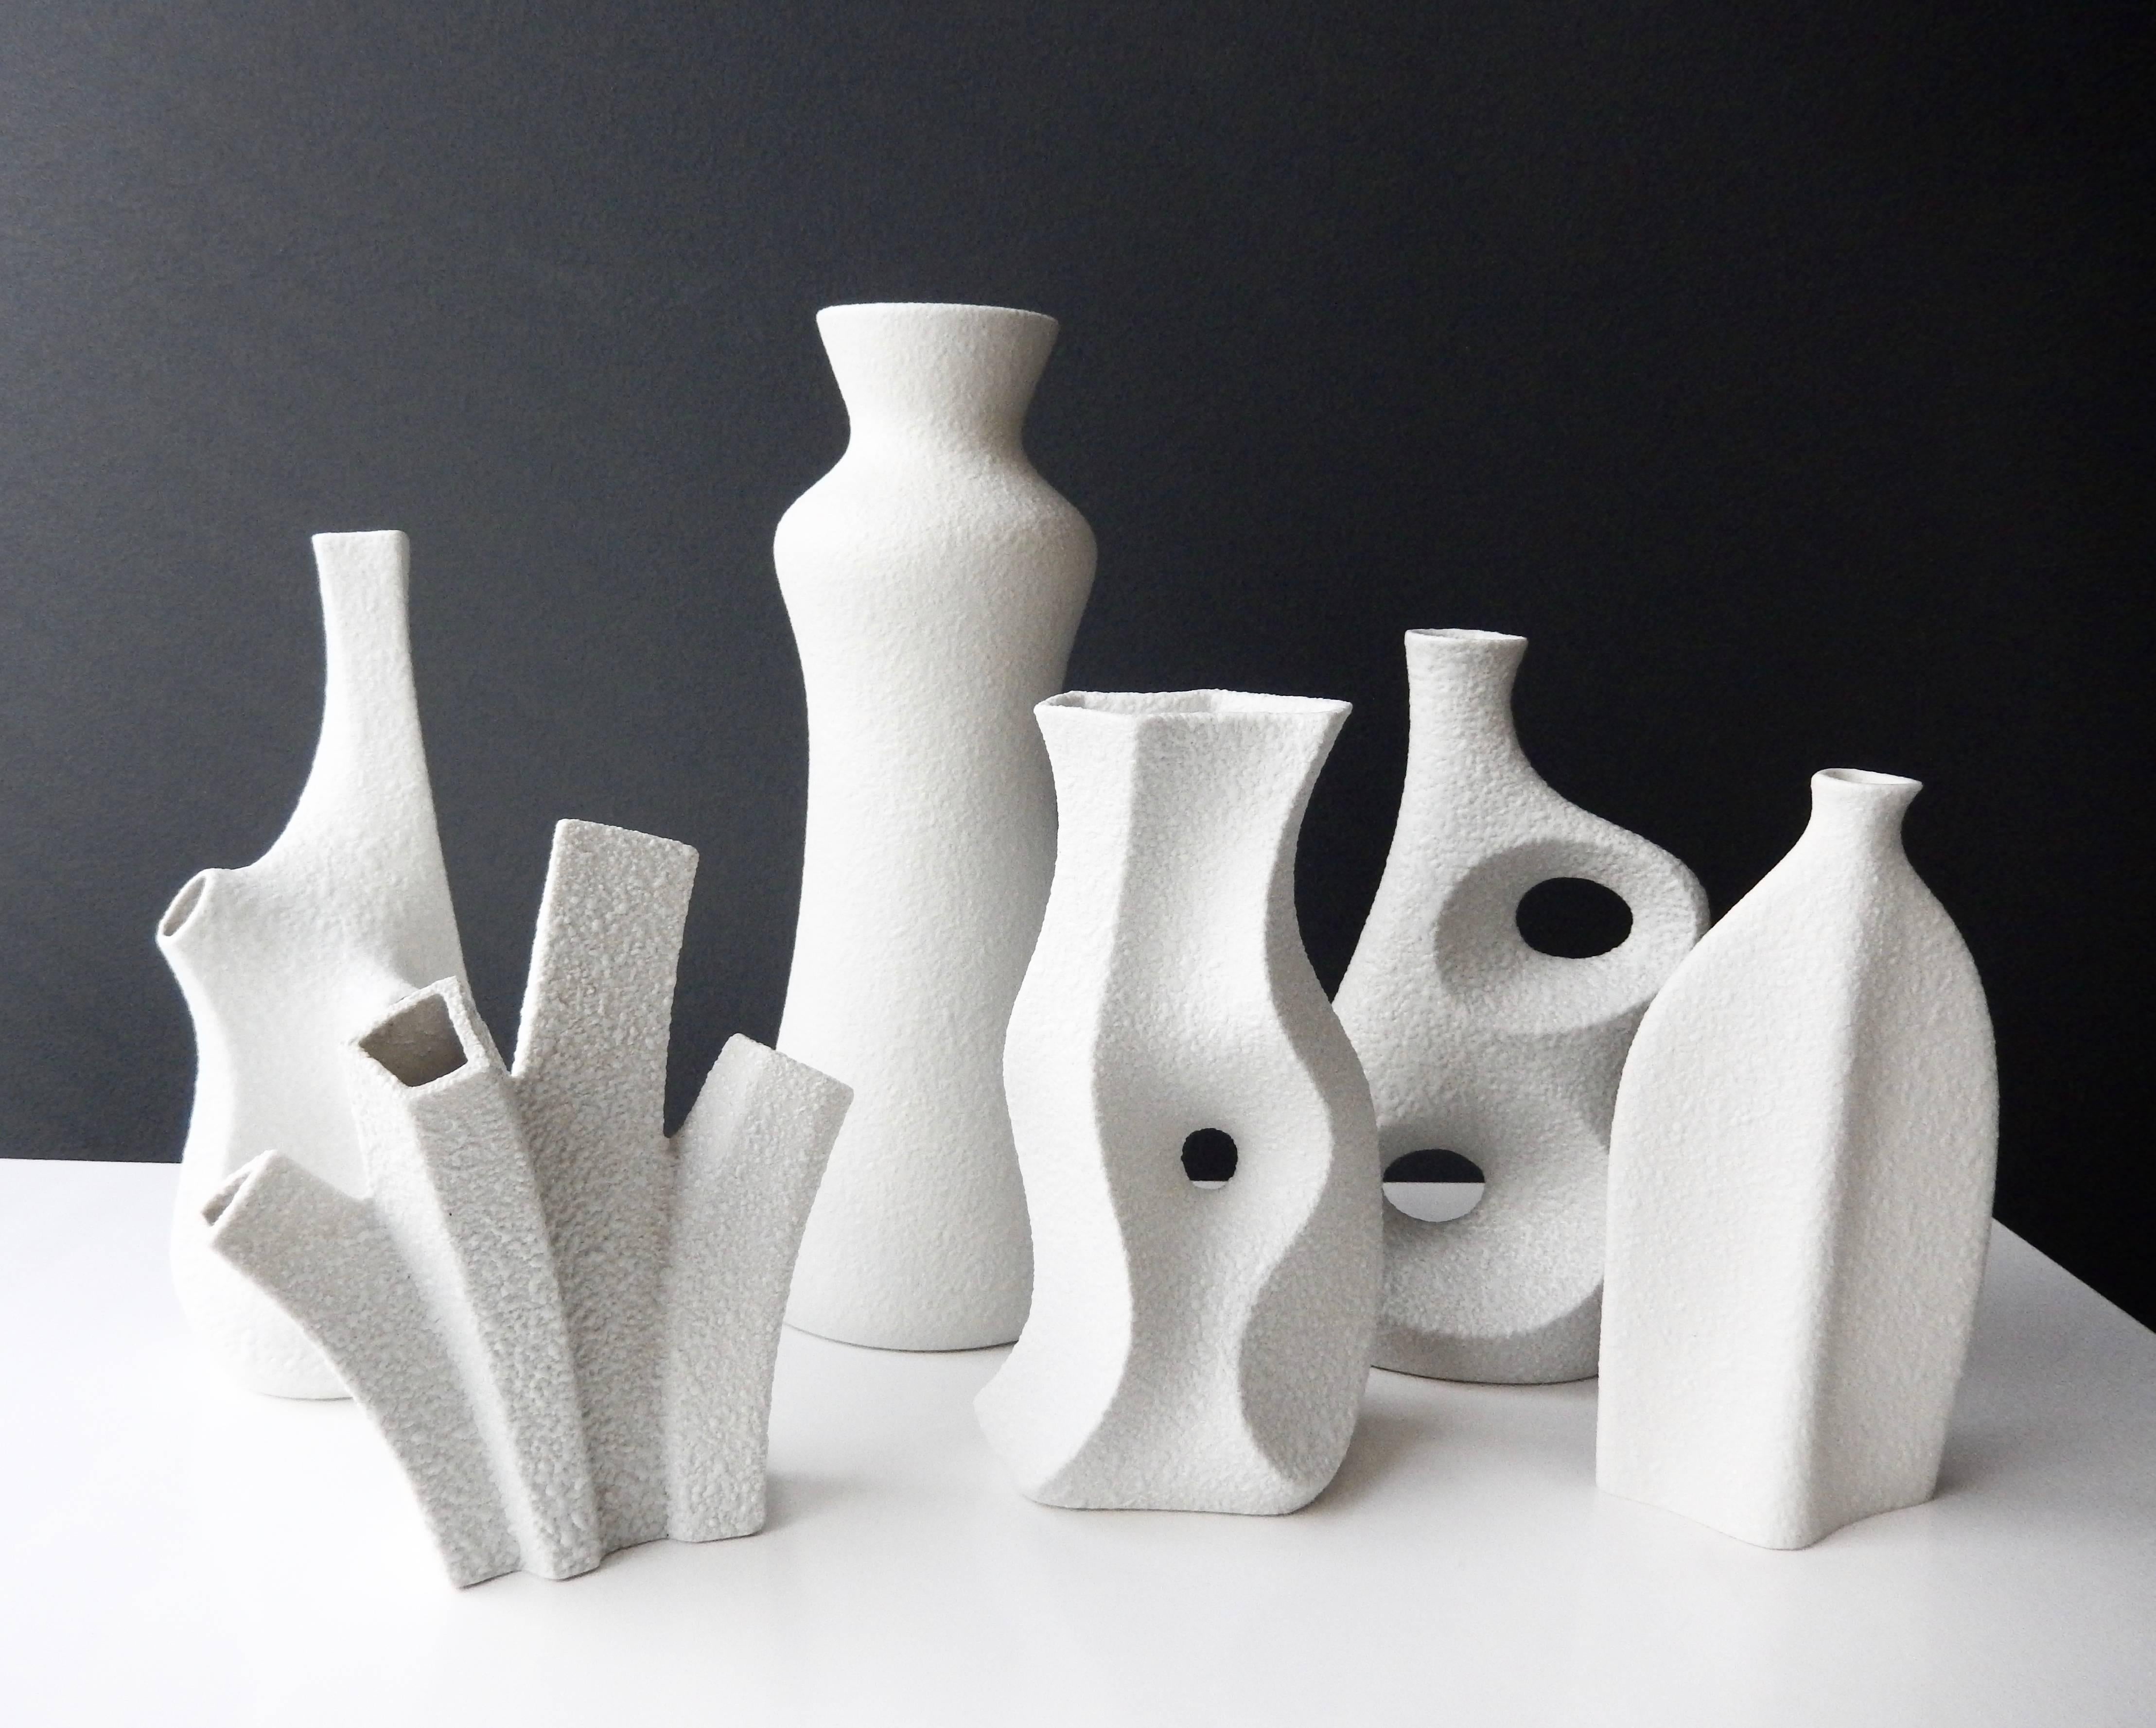 A group of six white porcelain vases by the innovative designer Peter Muller for Sgrafo Modern.

In 1955 two brothers, Peter and Klaus Muller opened a small porcelain factory in Germany and created some of the most modern, futuristic-looking